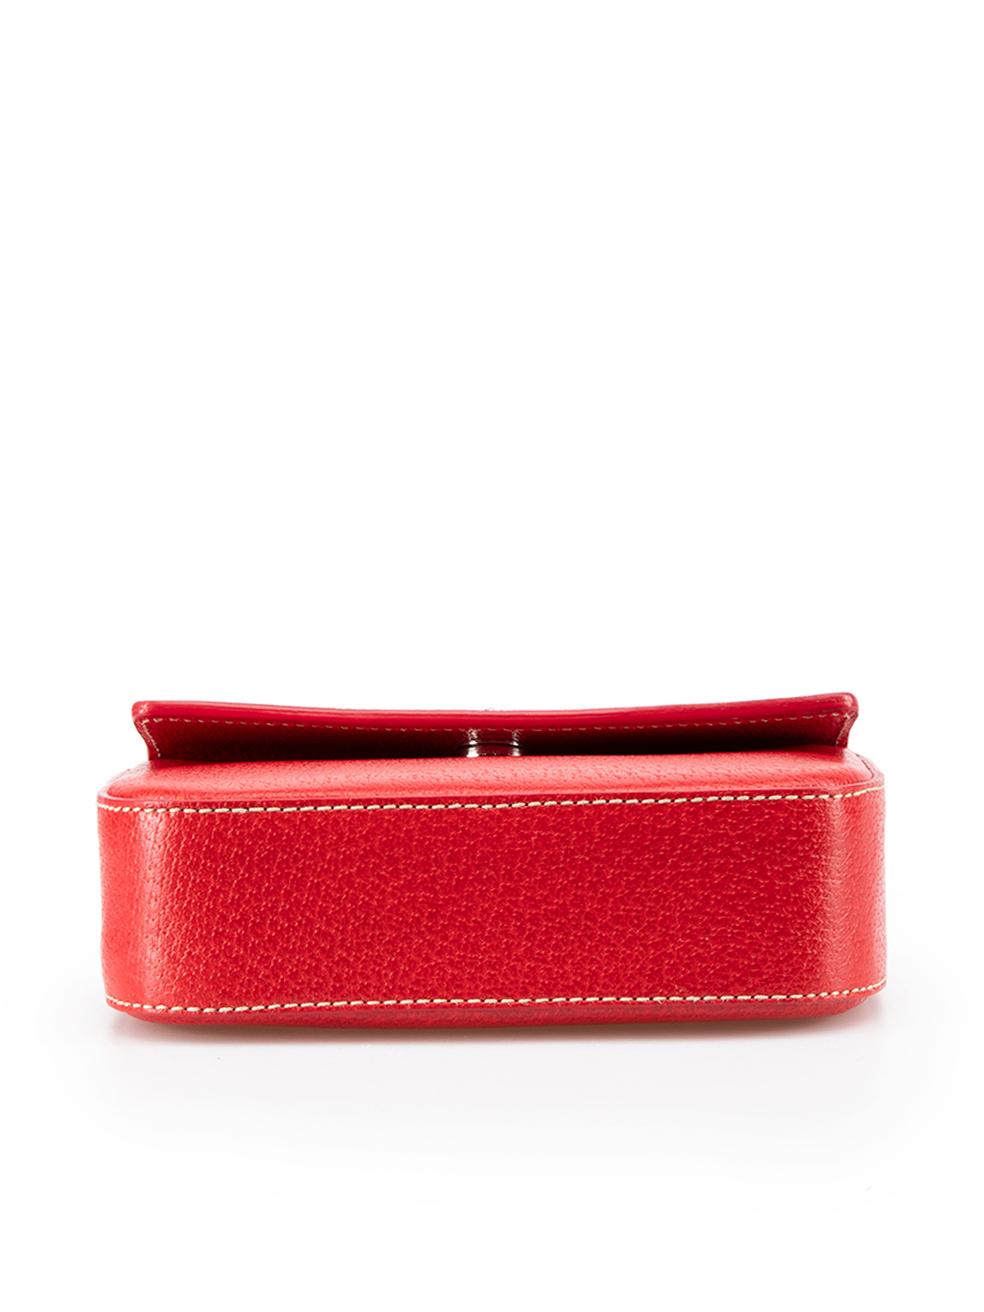 Women's Prada Red Leather Cinghiale Logo Pouch For Sale